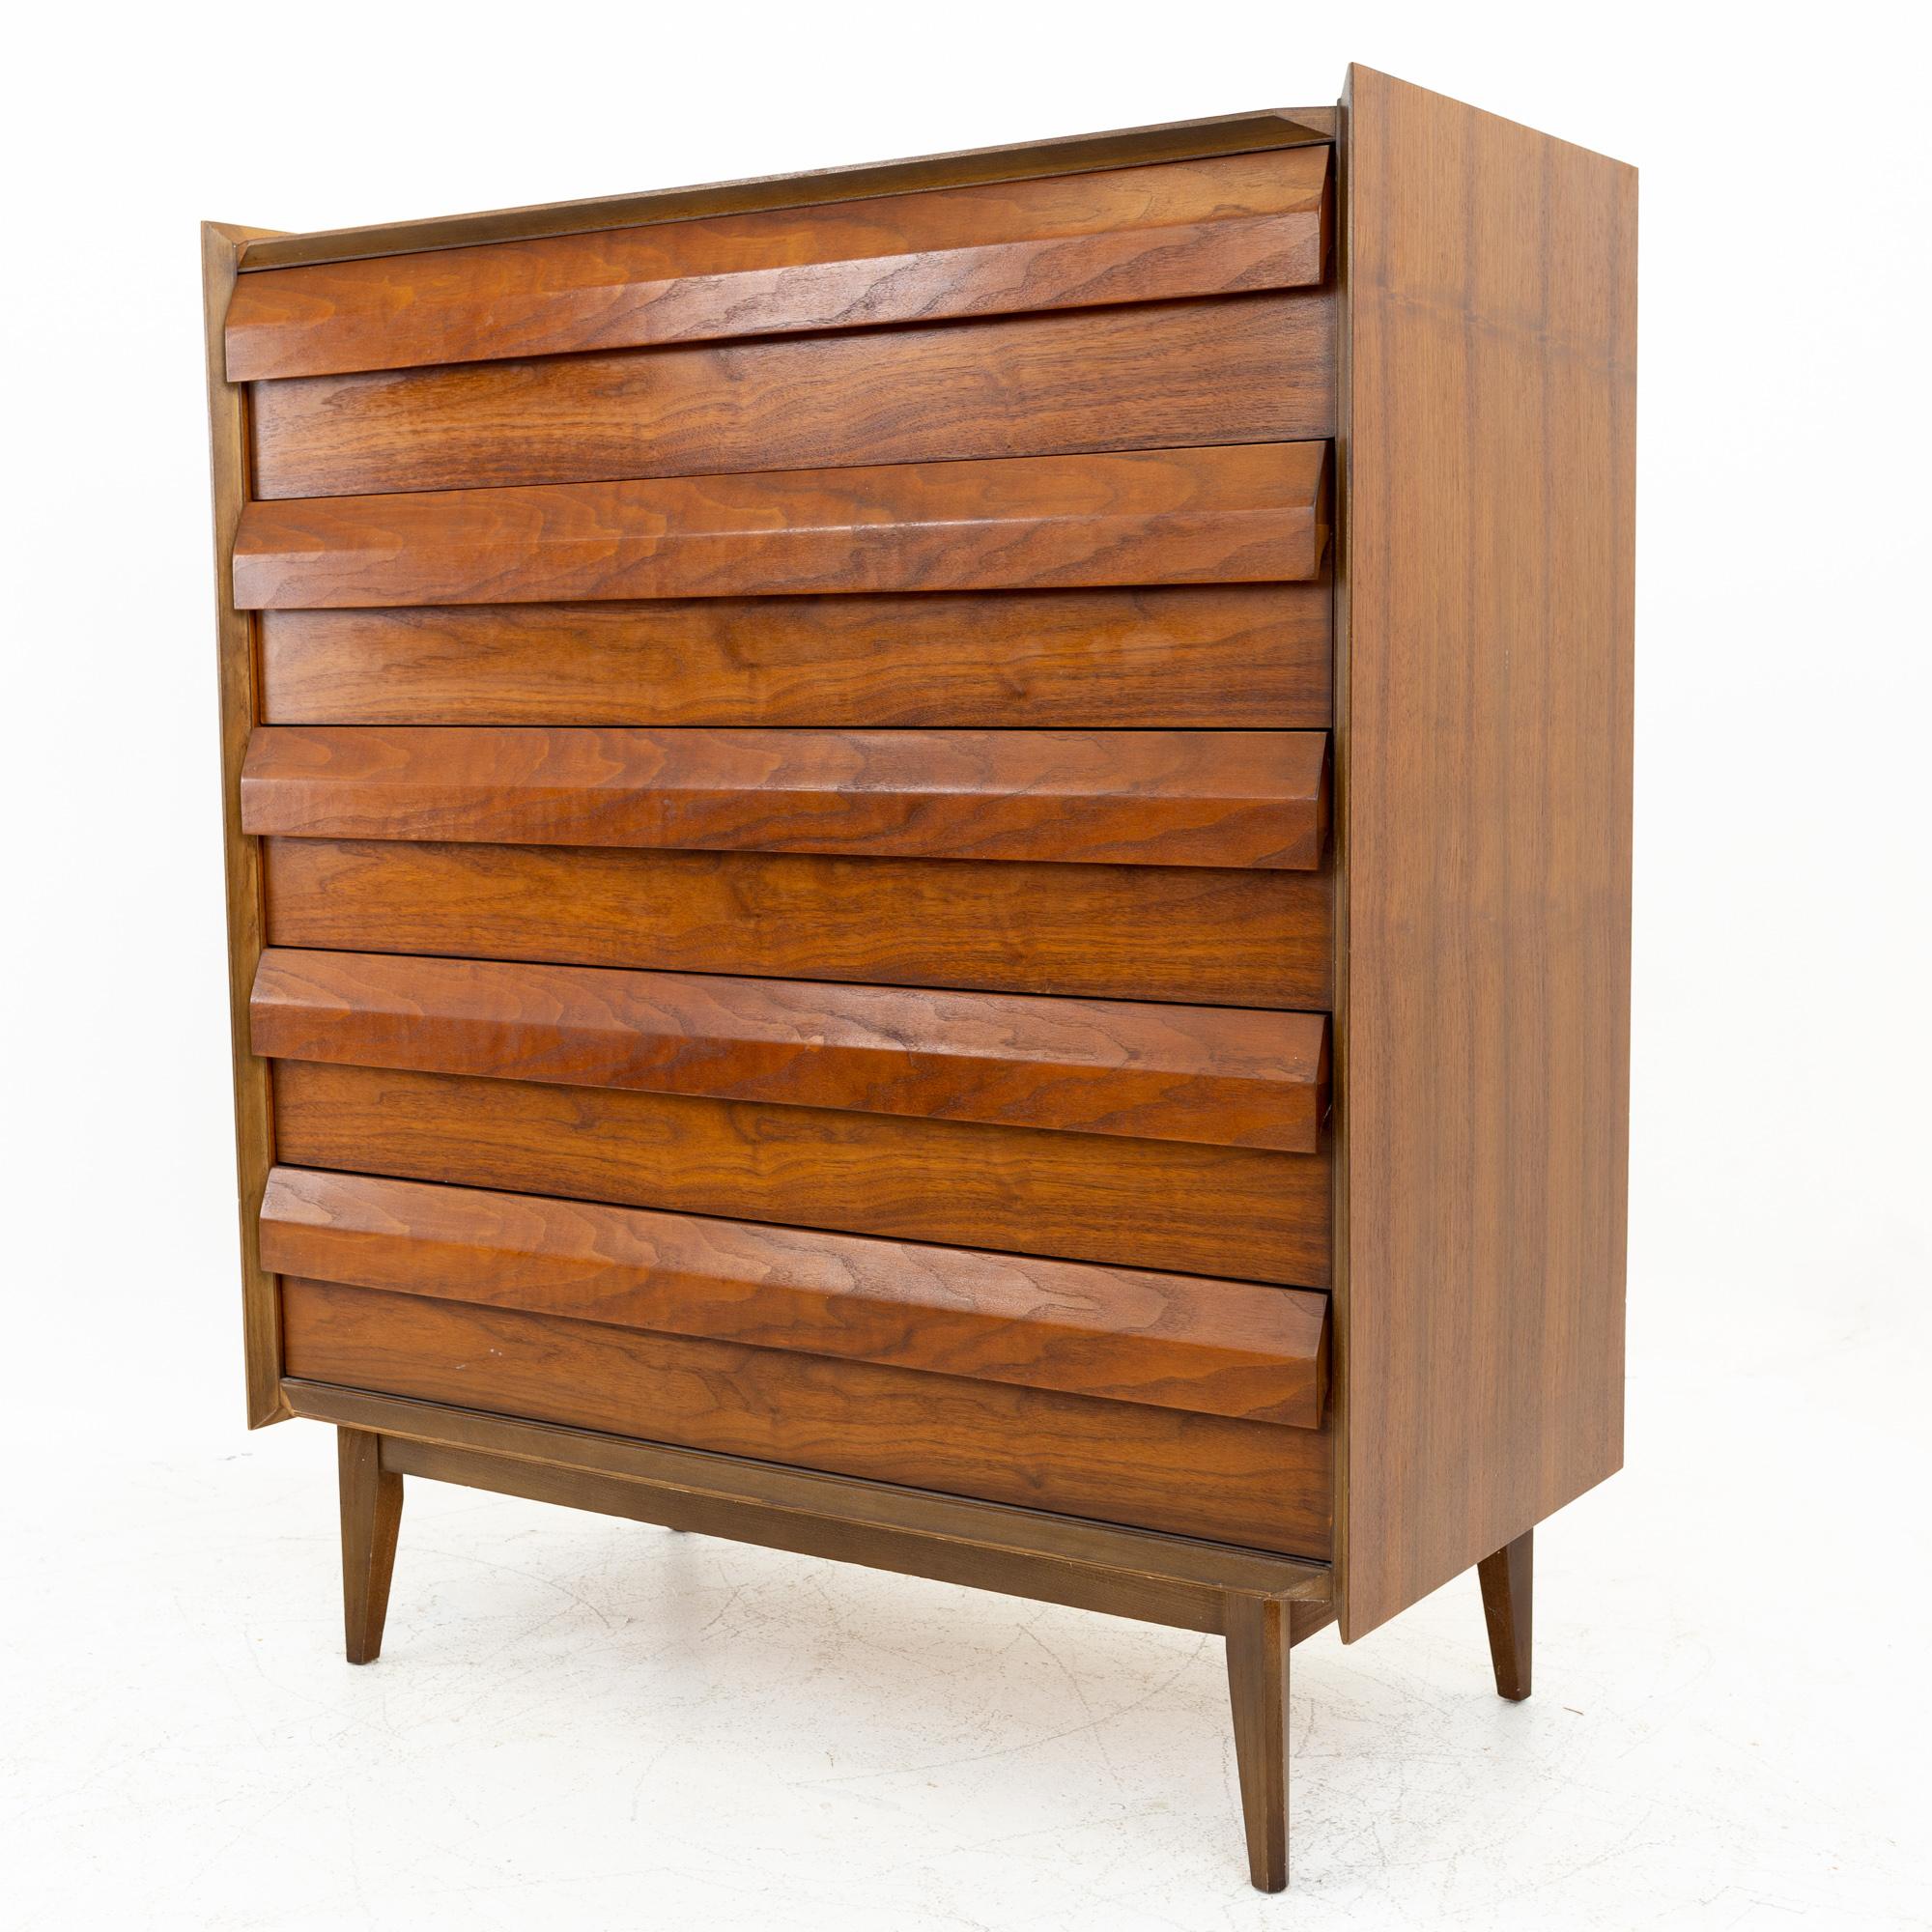 Lane first edition mid century walnut 5 drawer highboy dresser
This dresser is 38 wide x 18 deep x 44.5 inches high

All pieces of furniture can be had in what we call restored vintage condition. That means the piece is restored upon purchase so